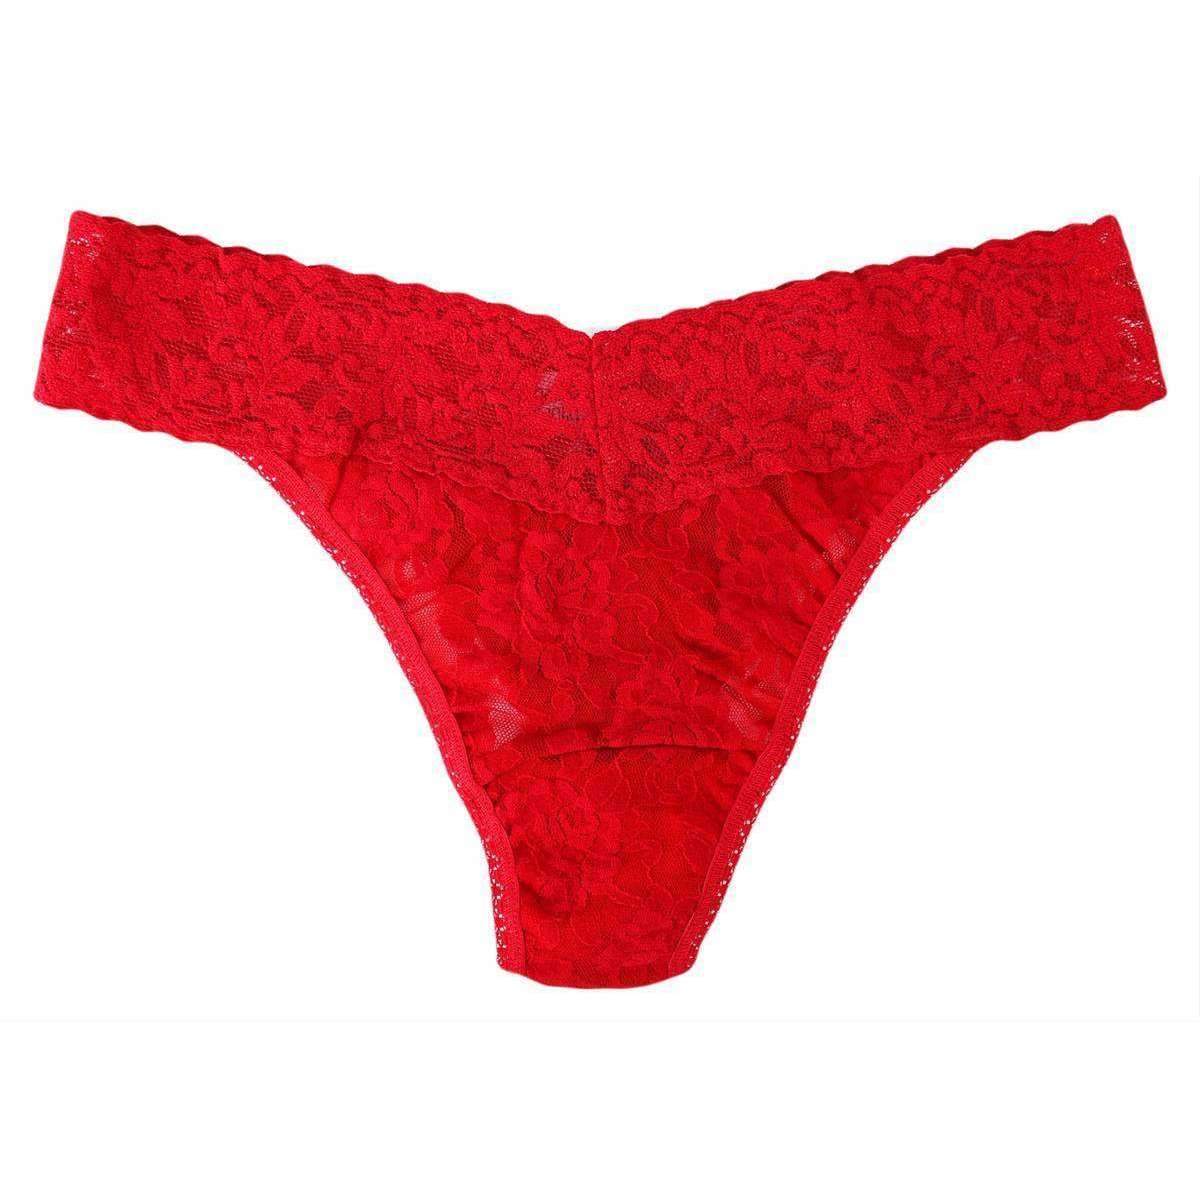 Houndstooth & floral lace thong [Poppy Red] – The Pantry Underwear